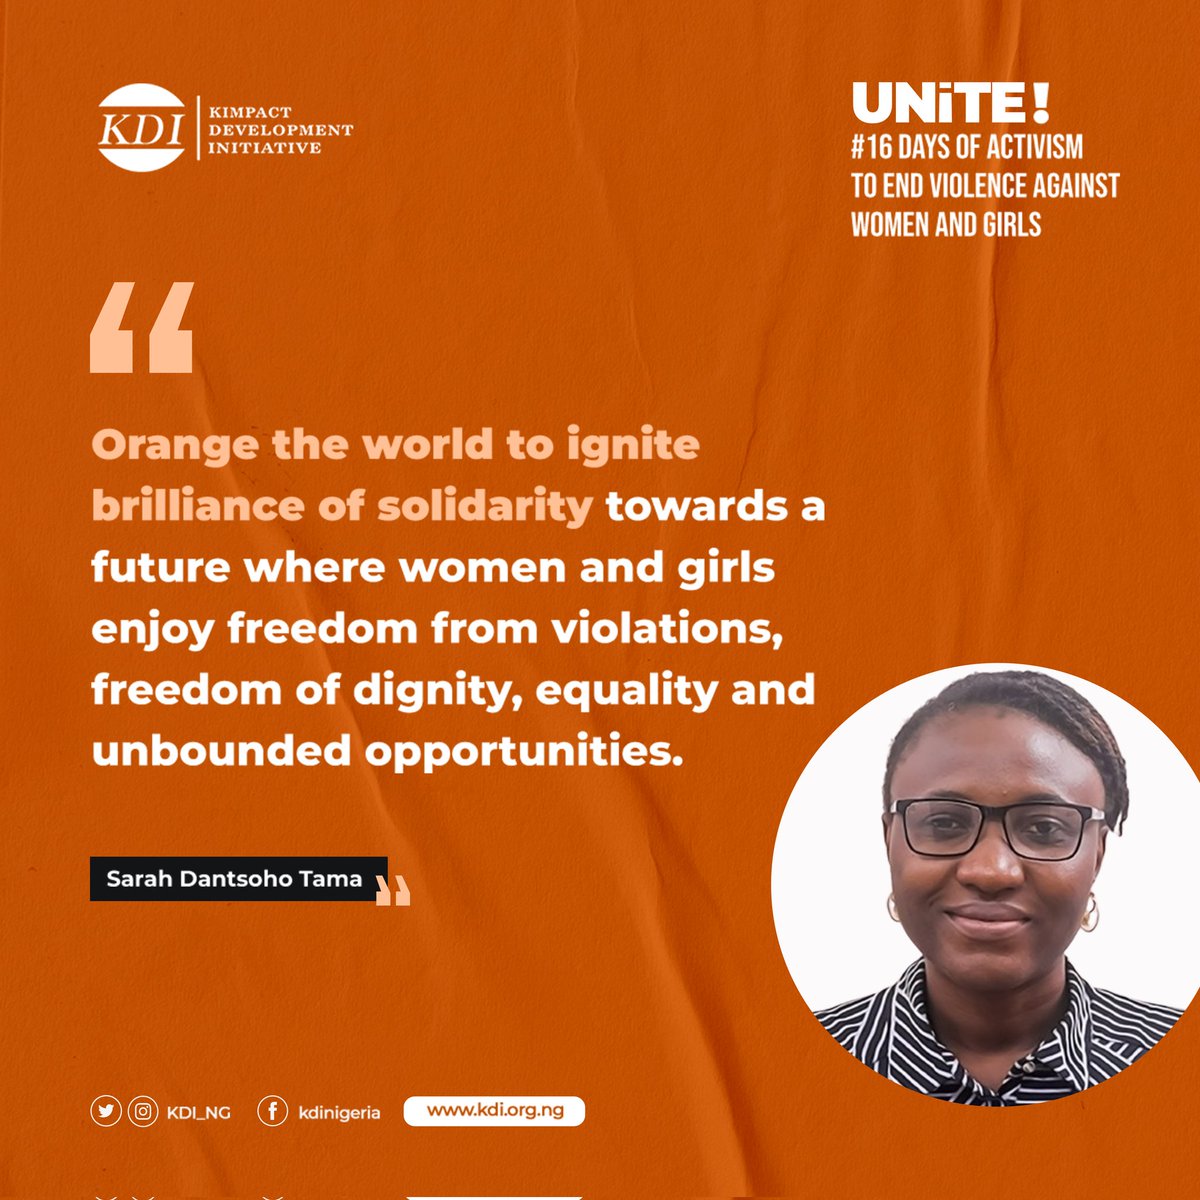 Let us unite as a nation to develop long-term systematic and structural reforms, that will eradicate the conditions that create and replicate violent relations. #UNITEInvestToPreventViolenceAgainstWomenAndGirls #SayNoToViolenceAgainstWomenAndGirls #16DaysOfActivism #Day1